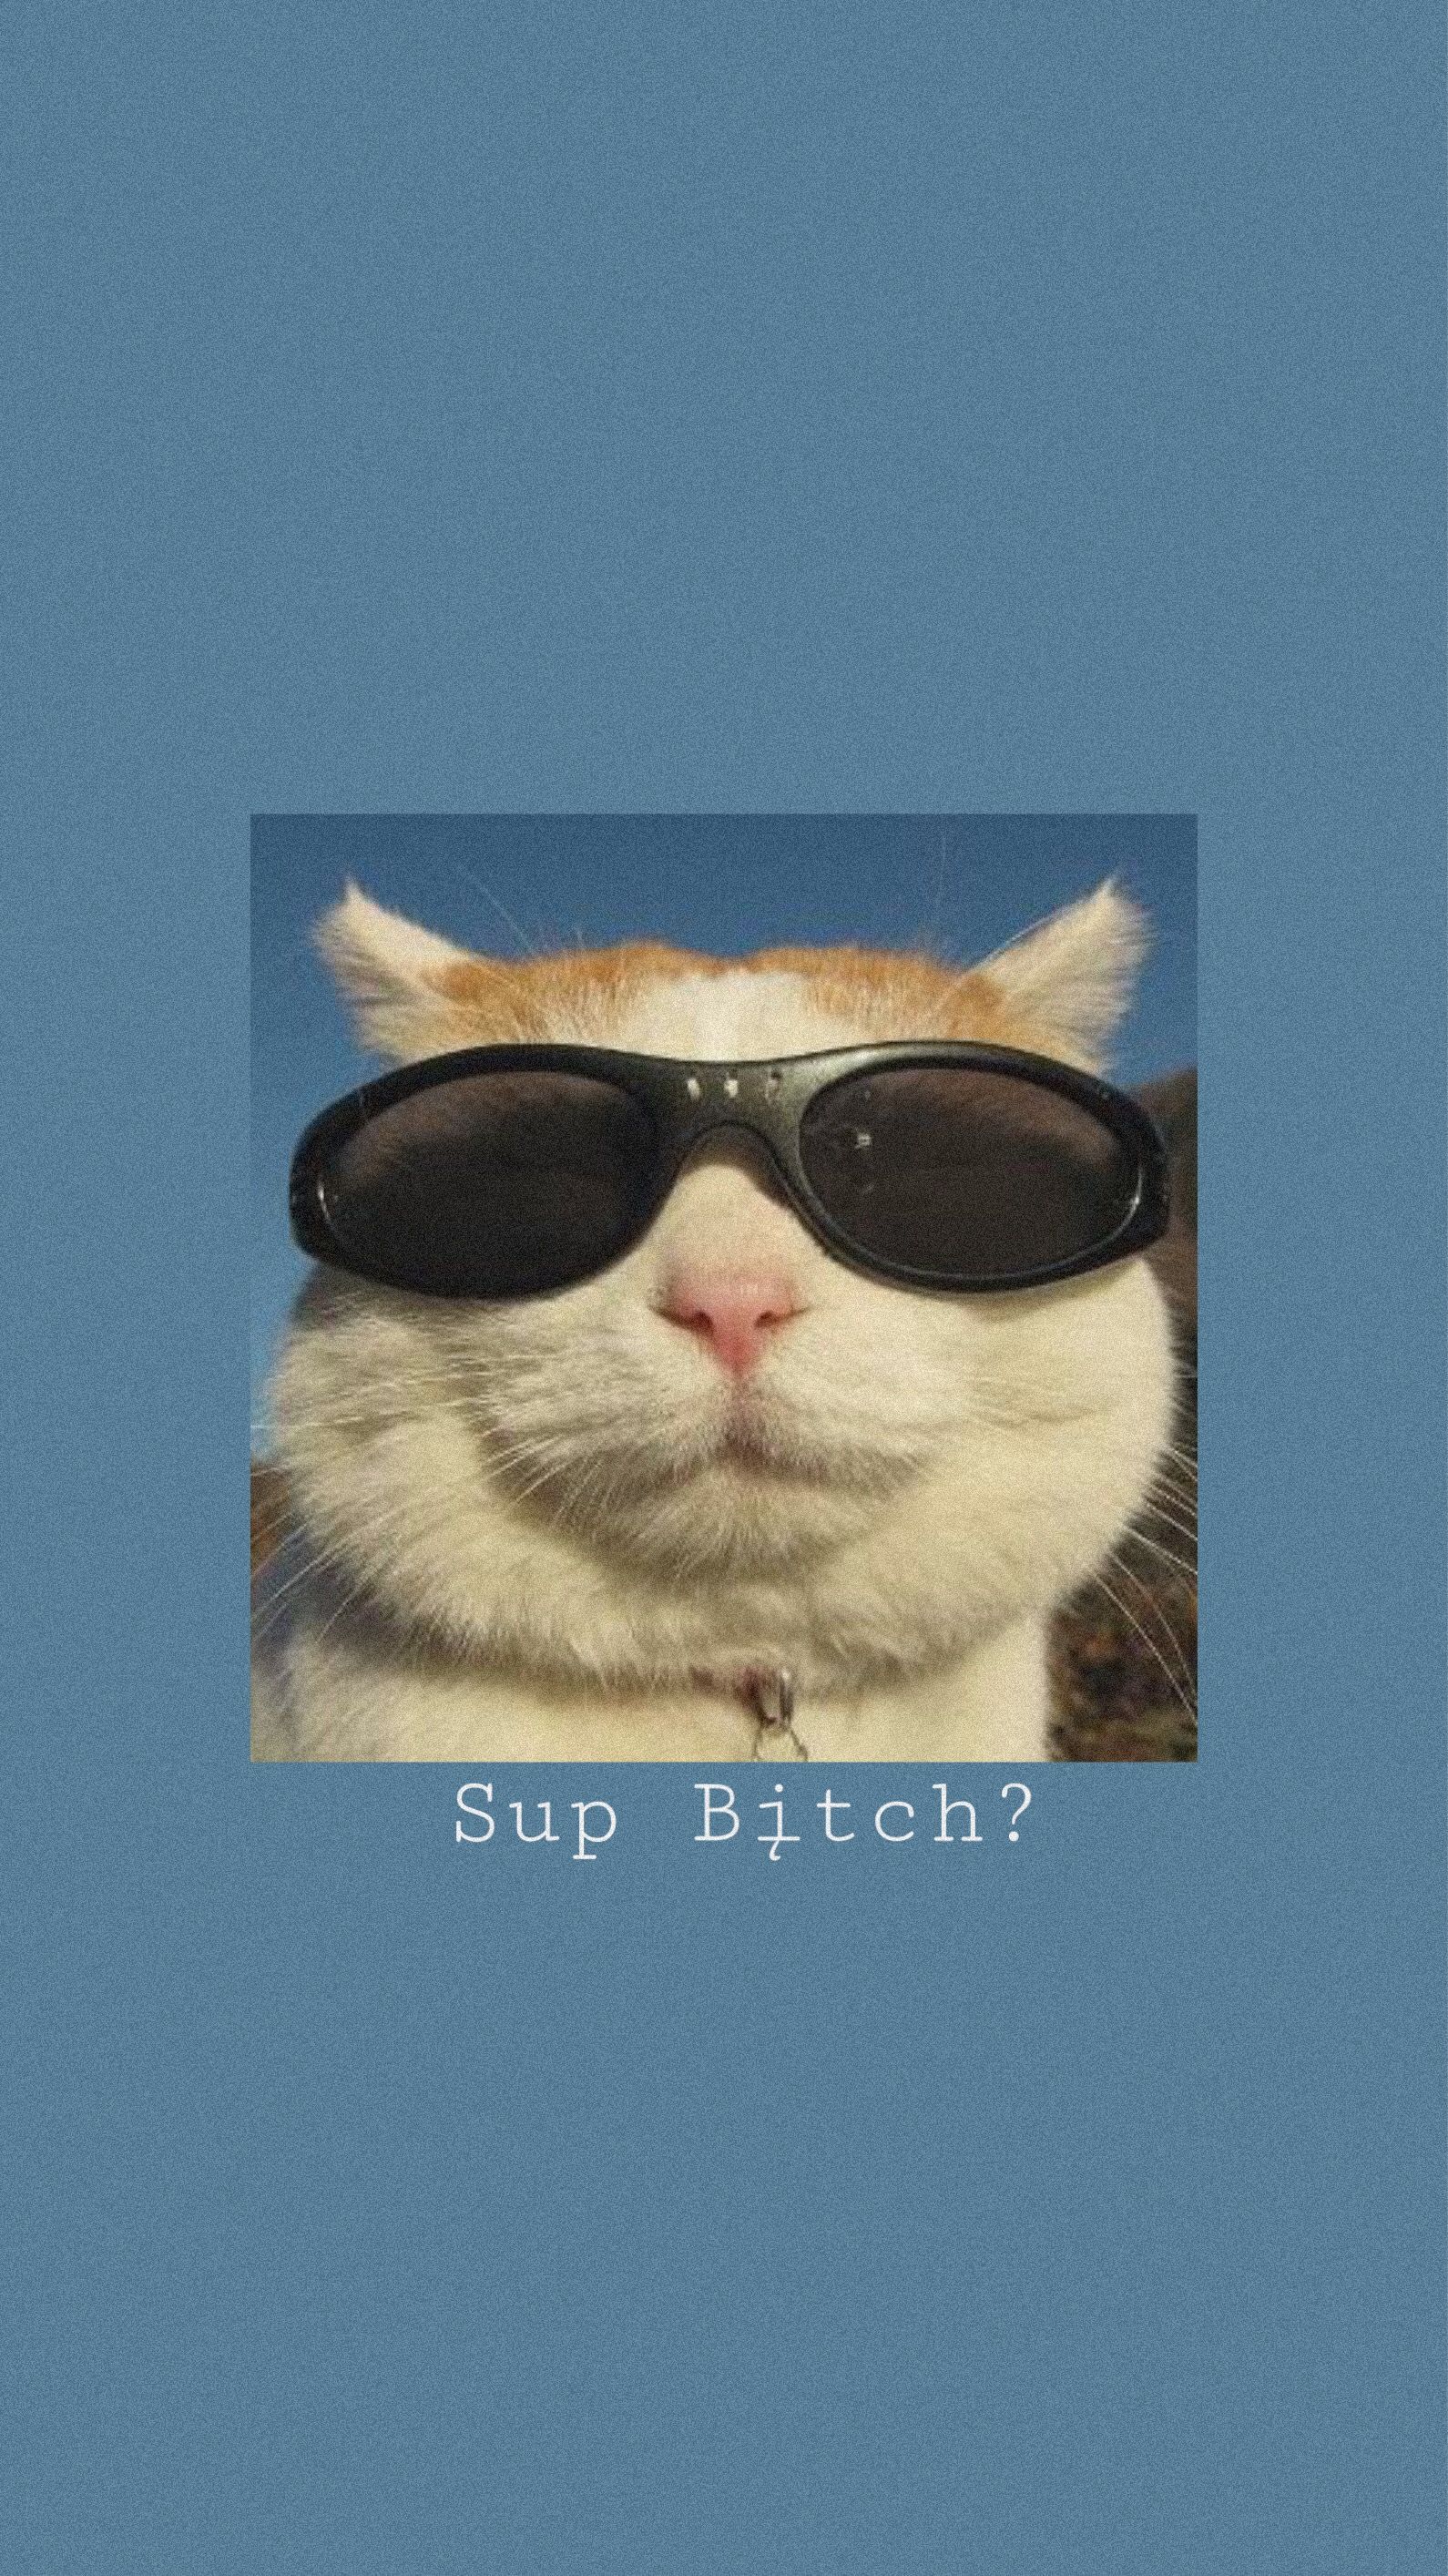 A picture of a cat wearing sunglasses with the caption 